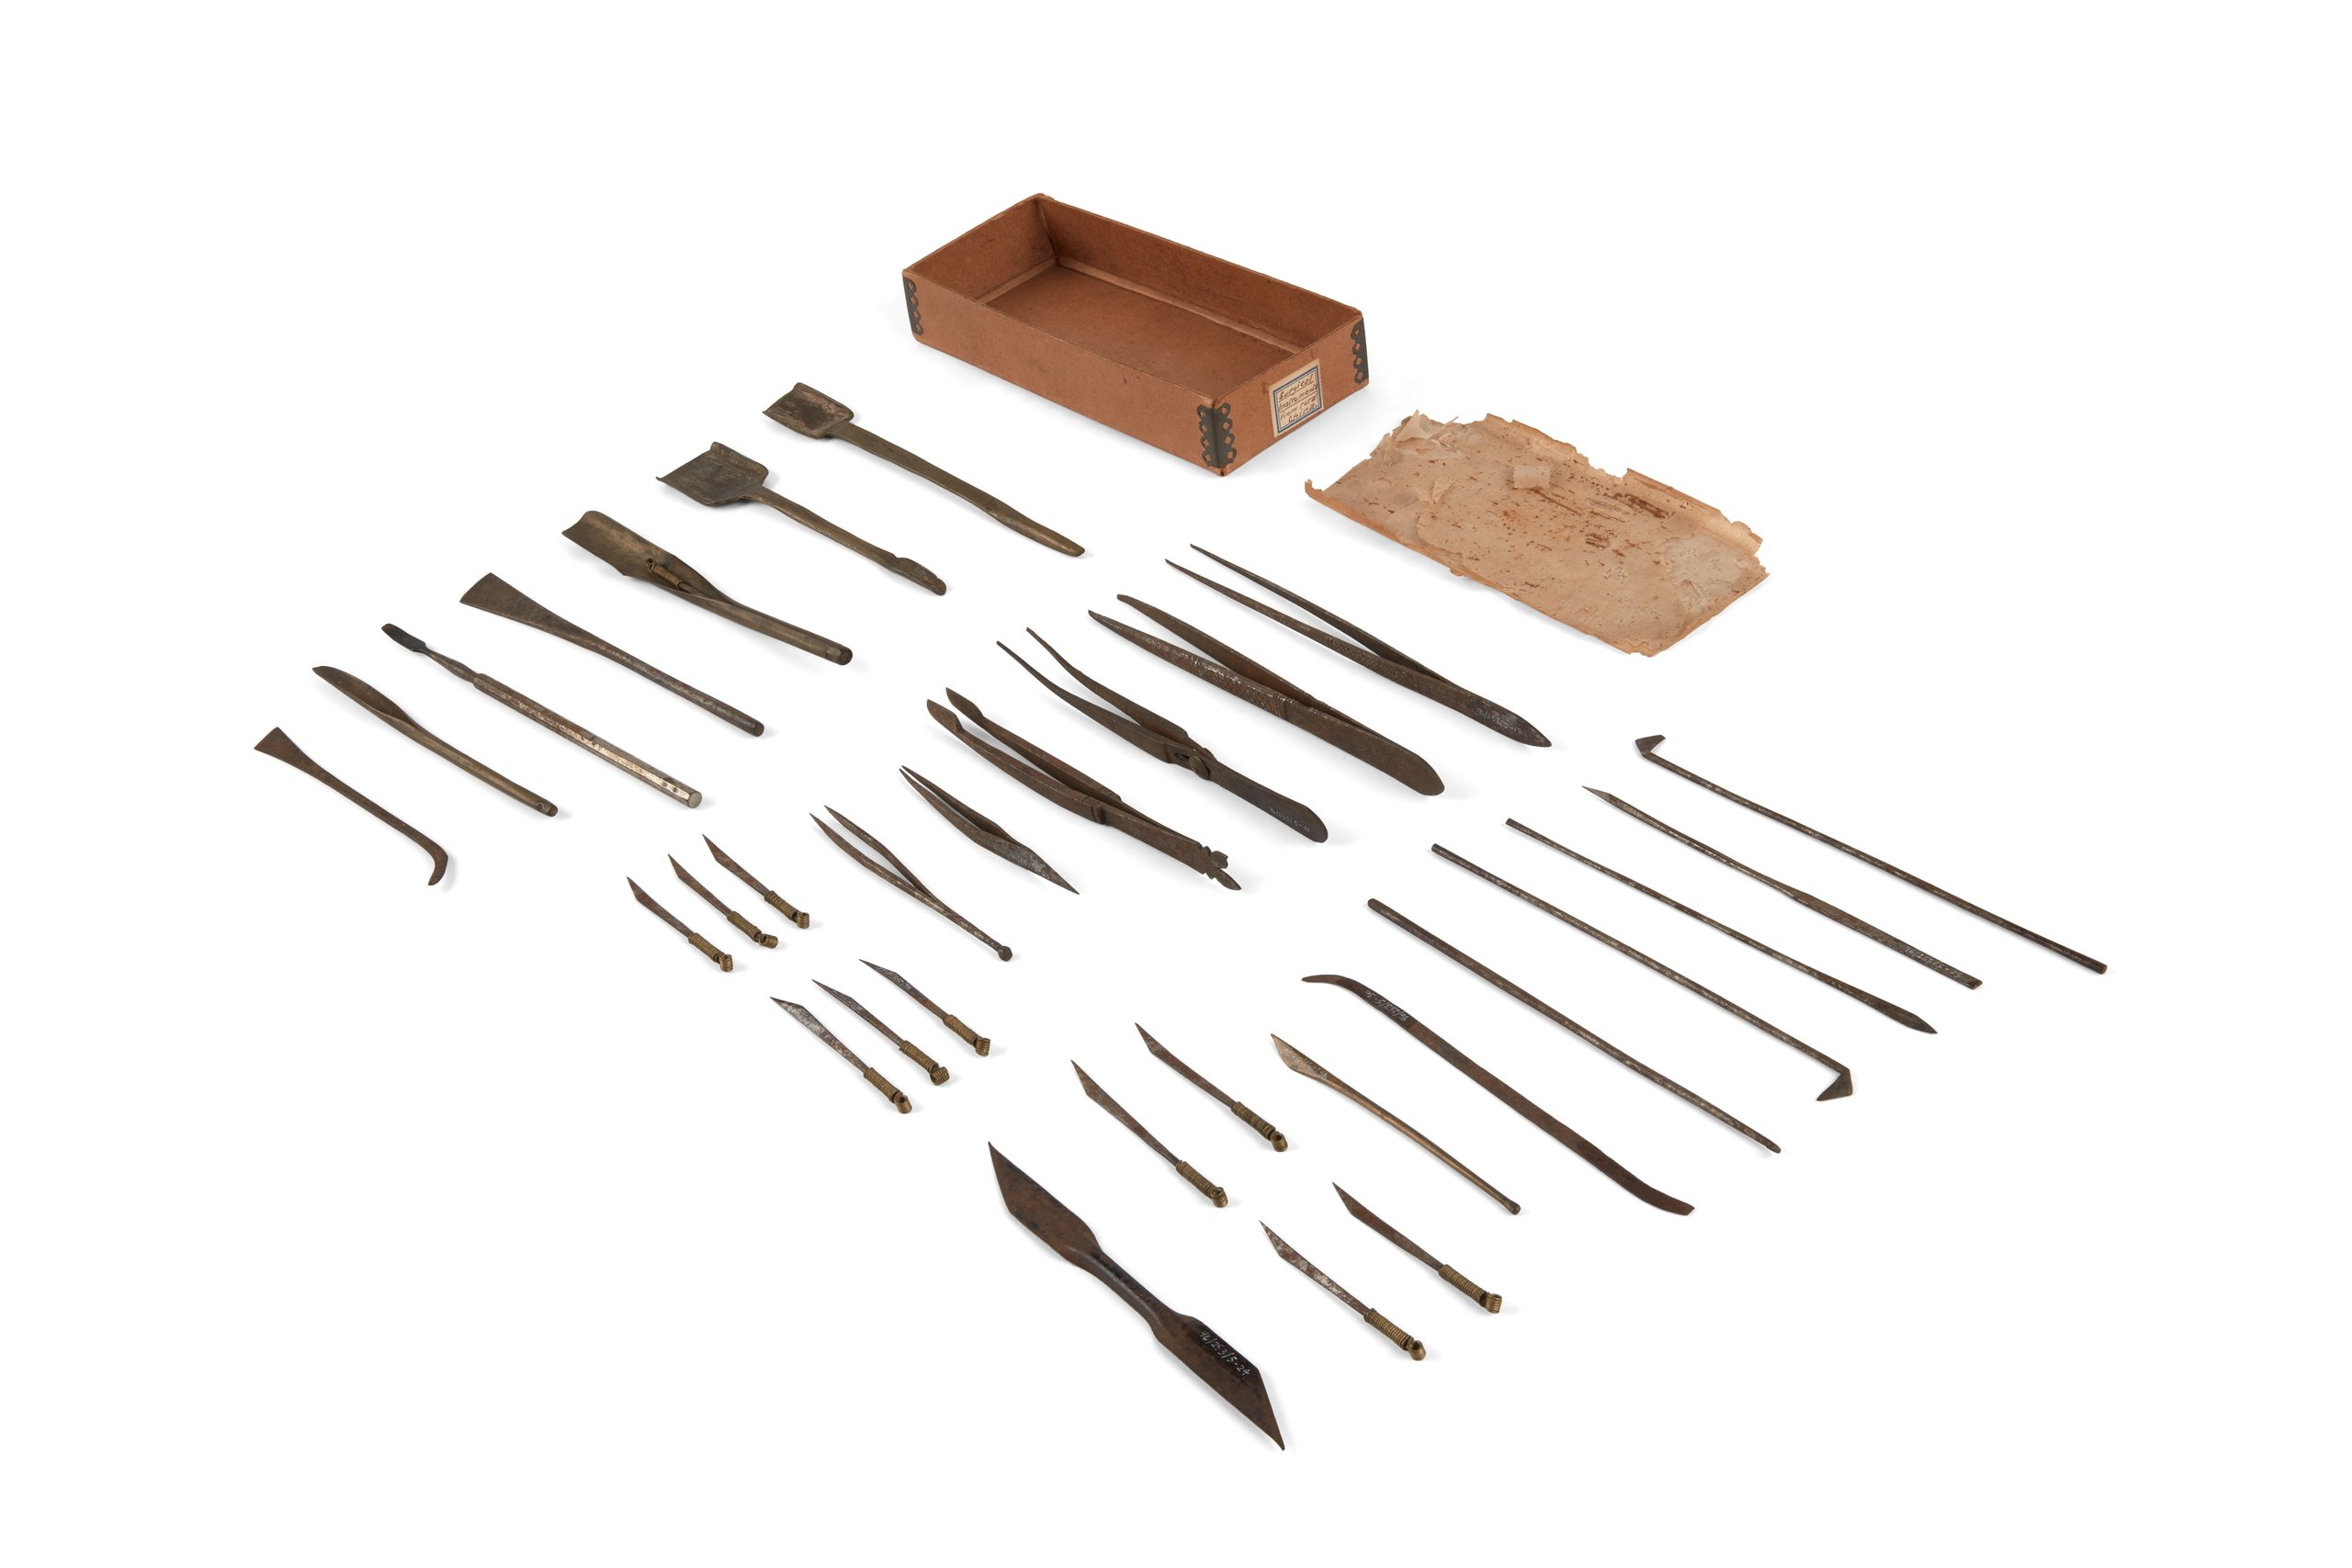 Collection of medical and surgical tools from China